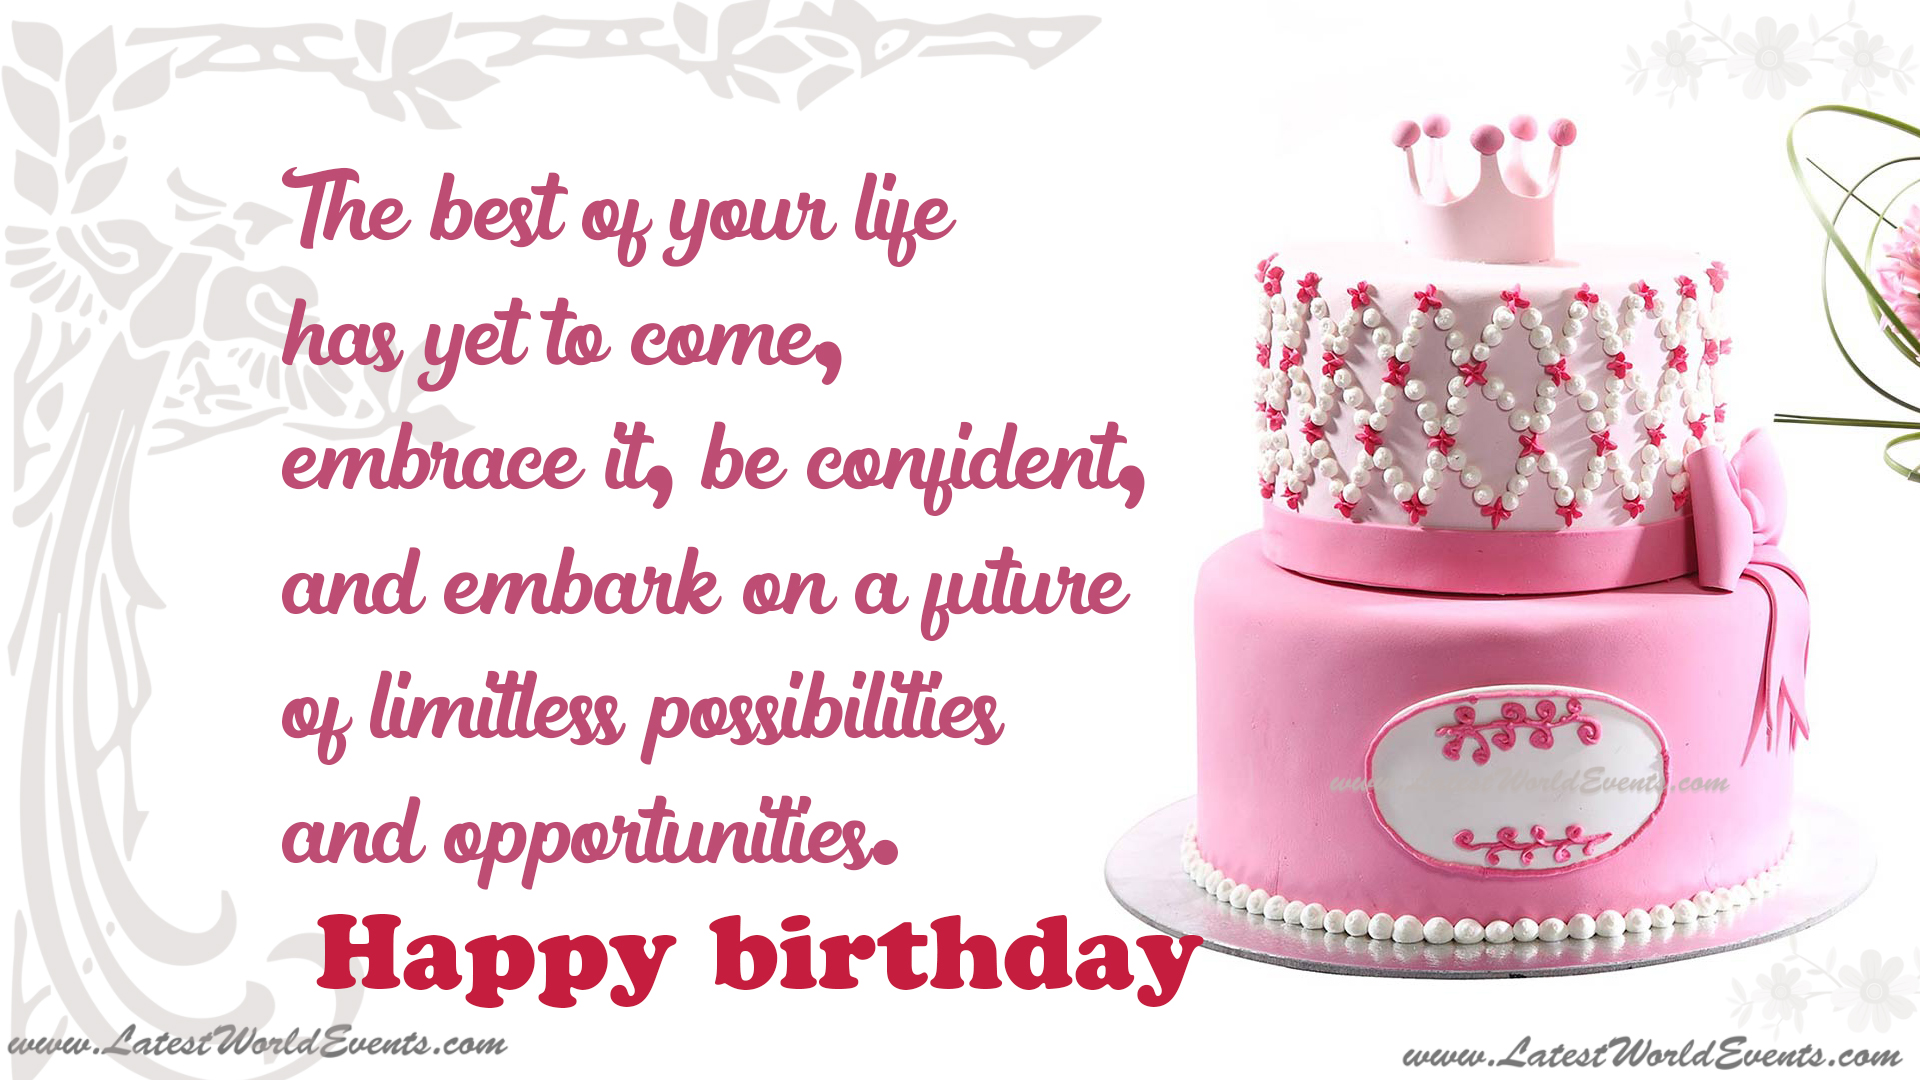 birthday-messages-quotes-wishes